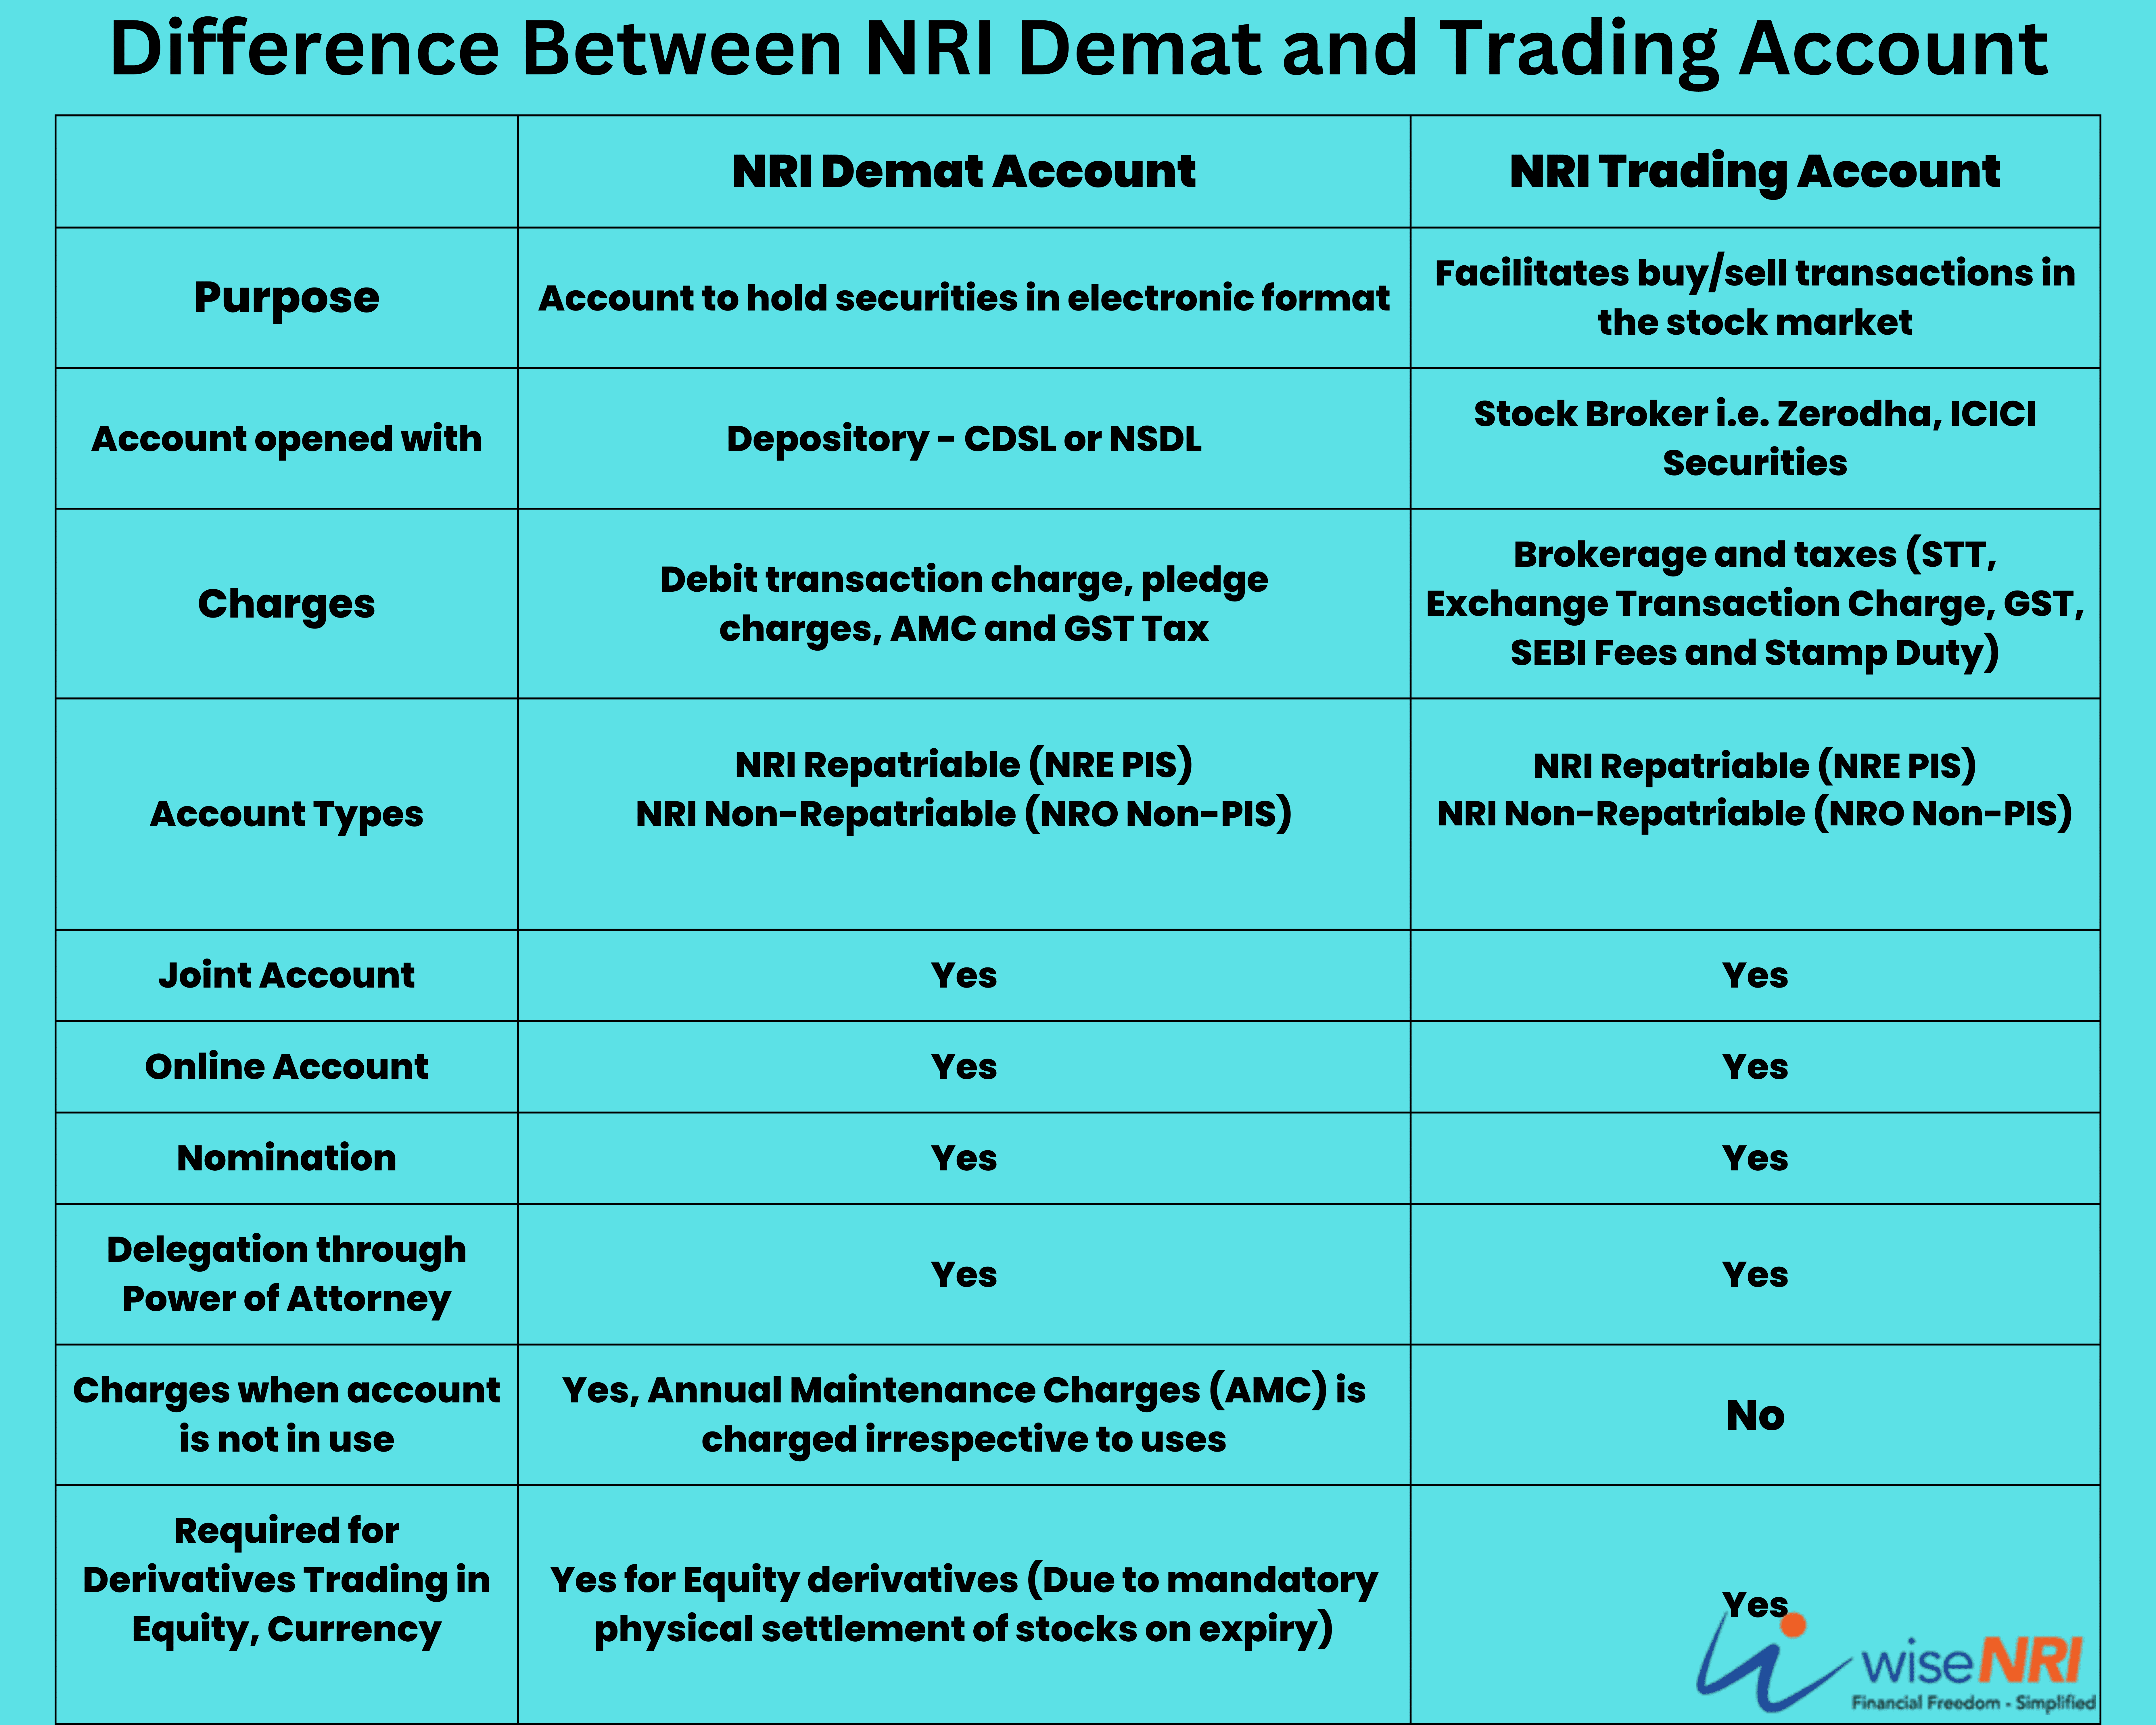 Difference Between NRI Demat and Trading Account (1)